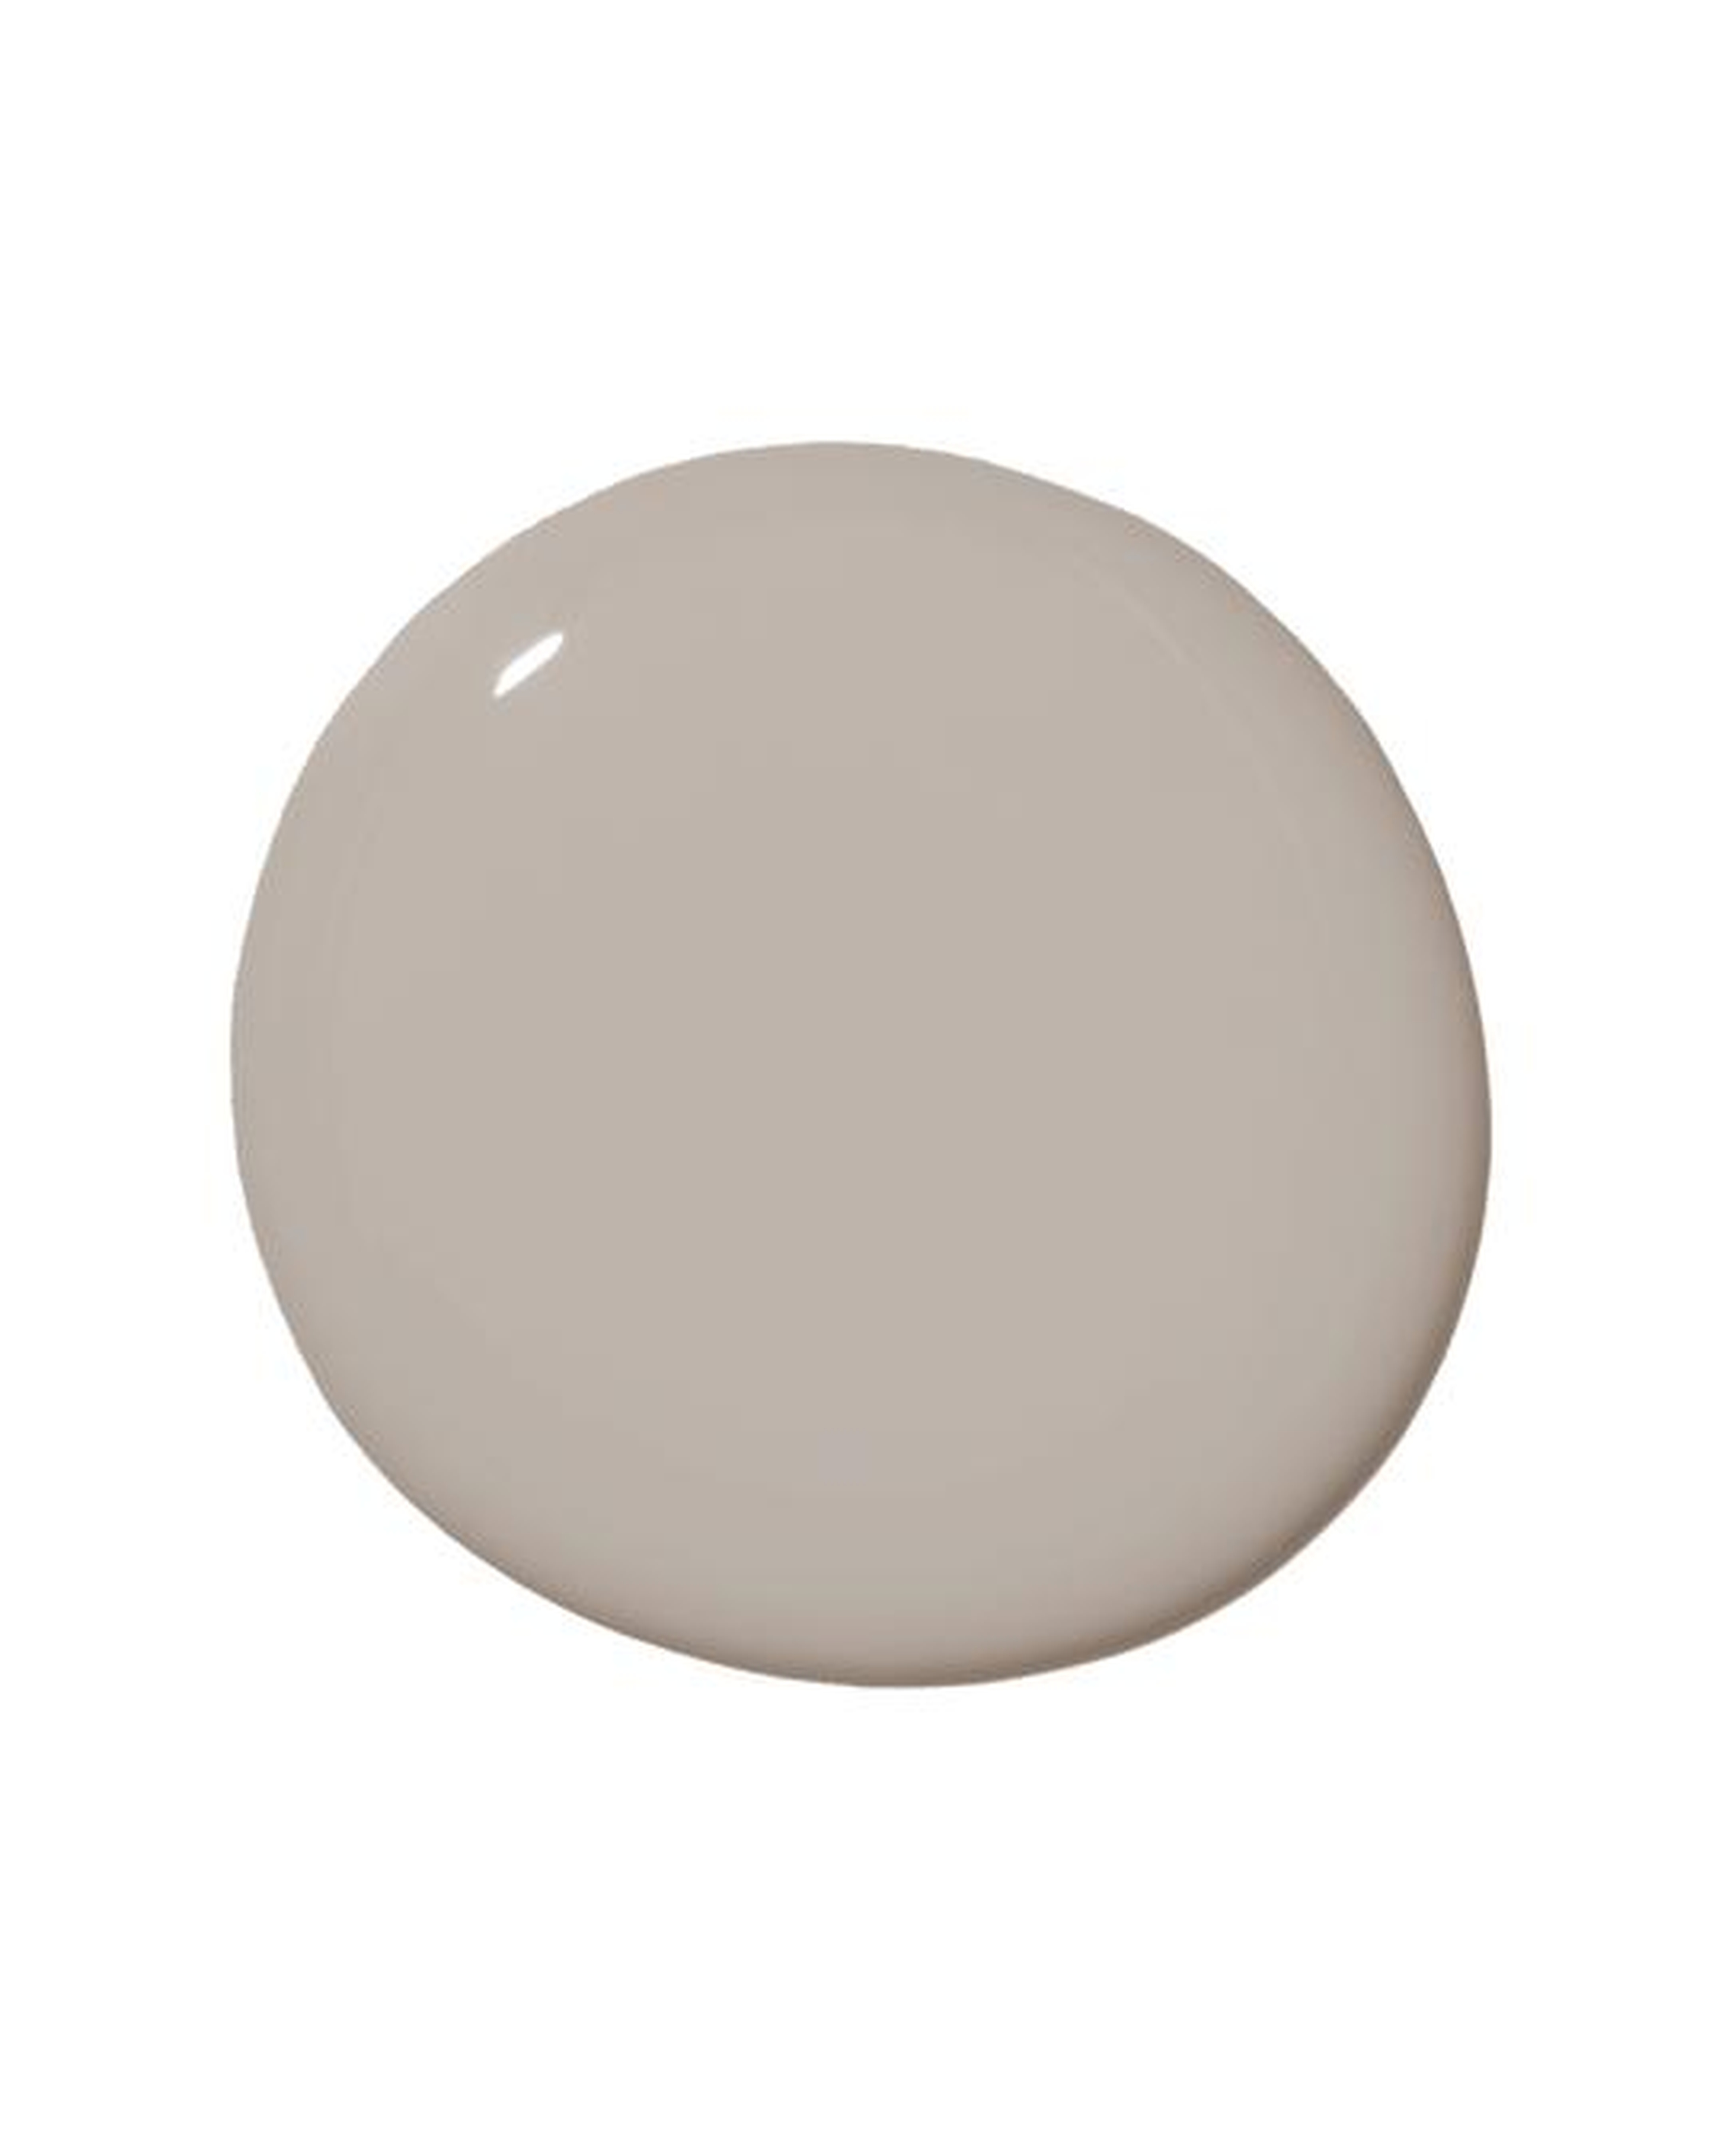 Greige, Gallon, Wall - Eggshell - Clare Paint